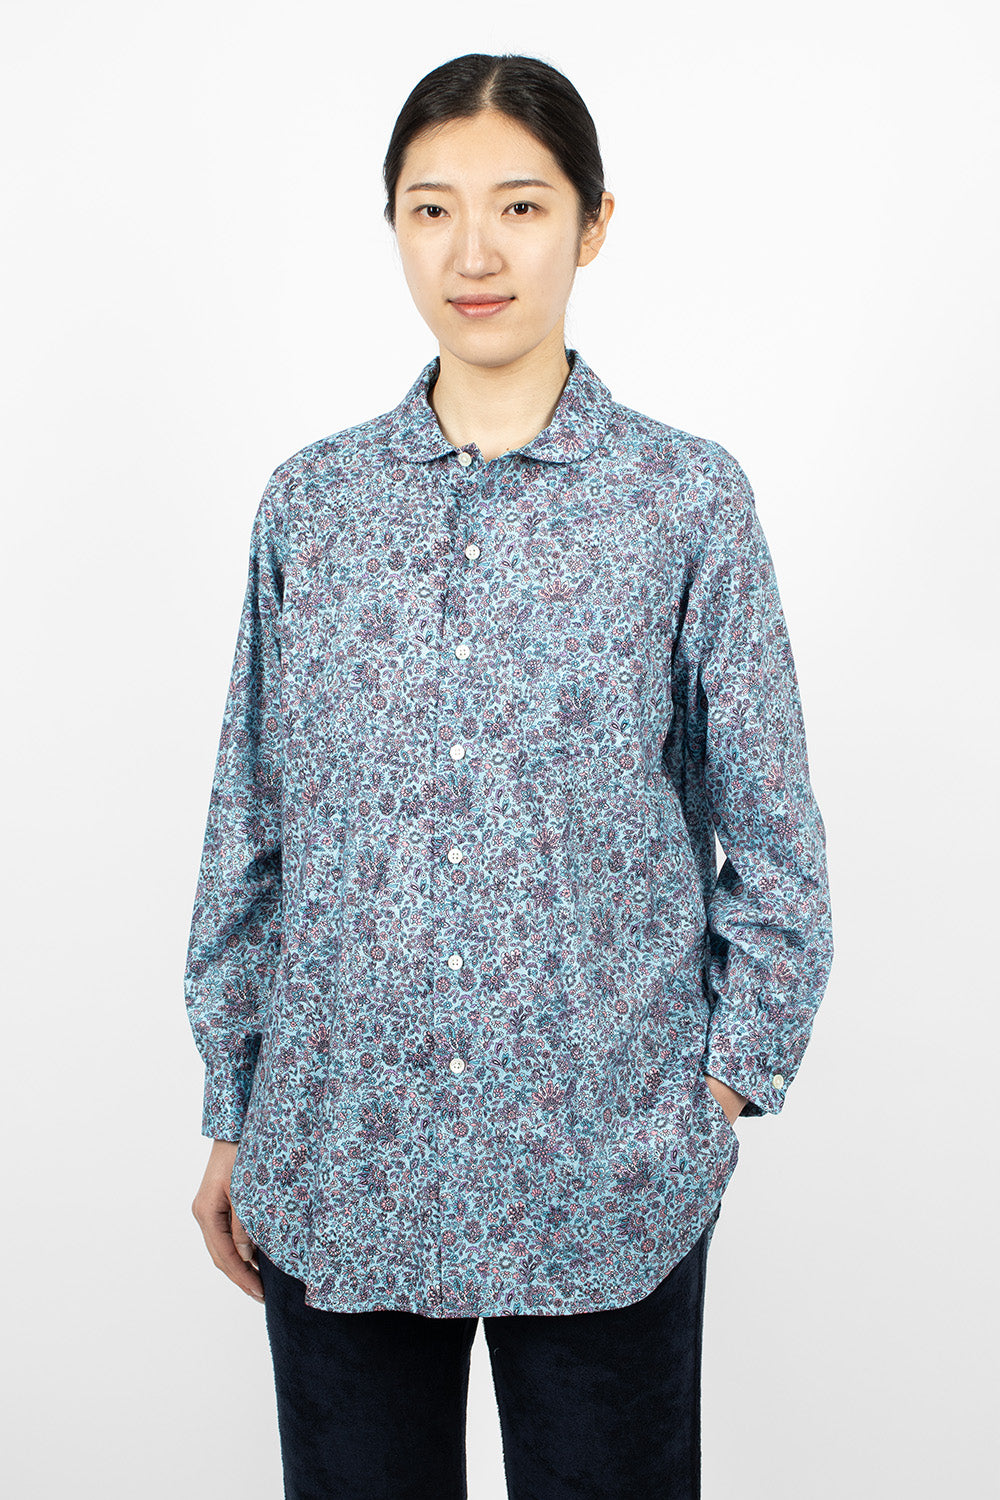 Rounded Collar Shirt Light Blue/Floral